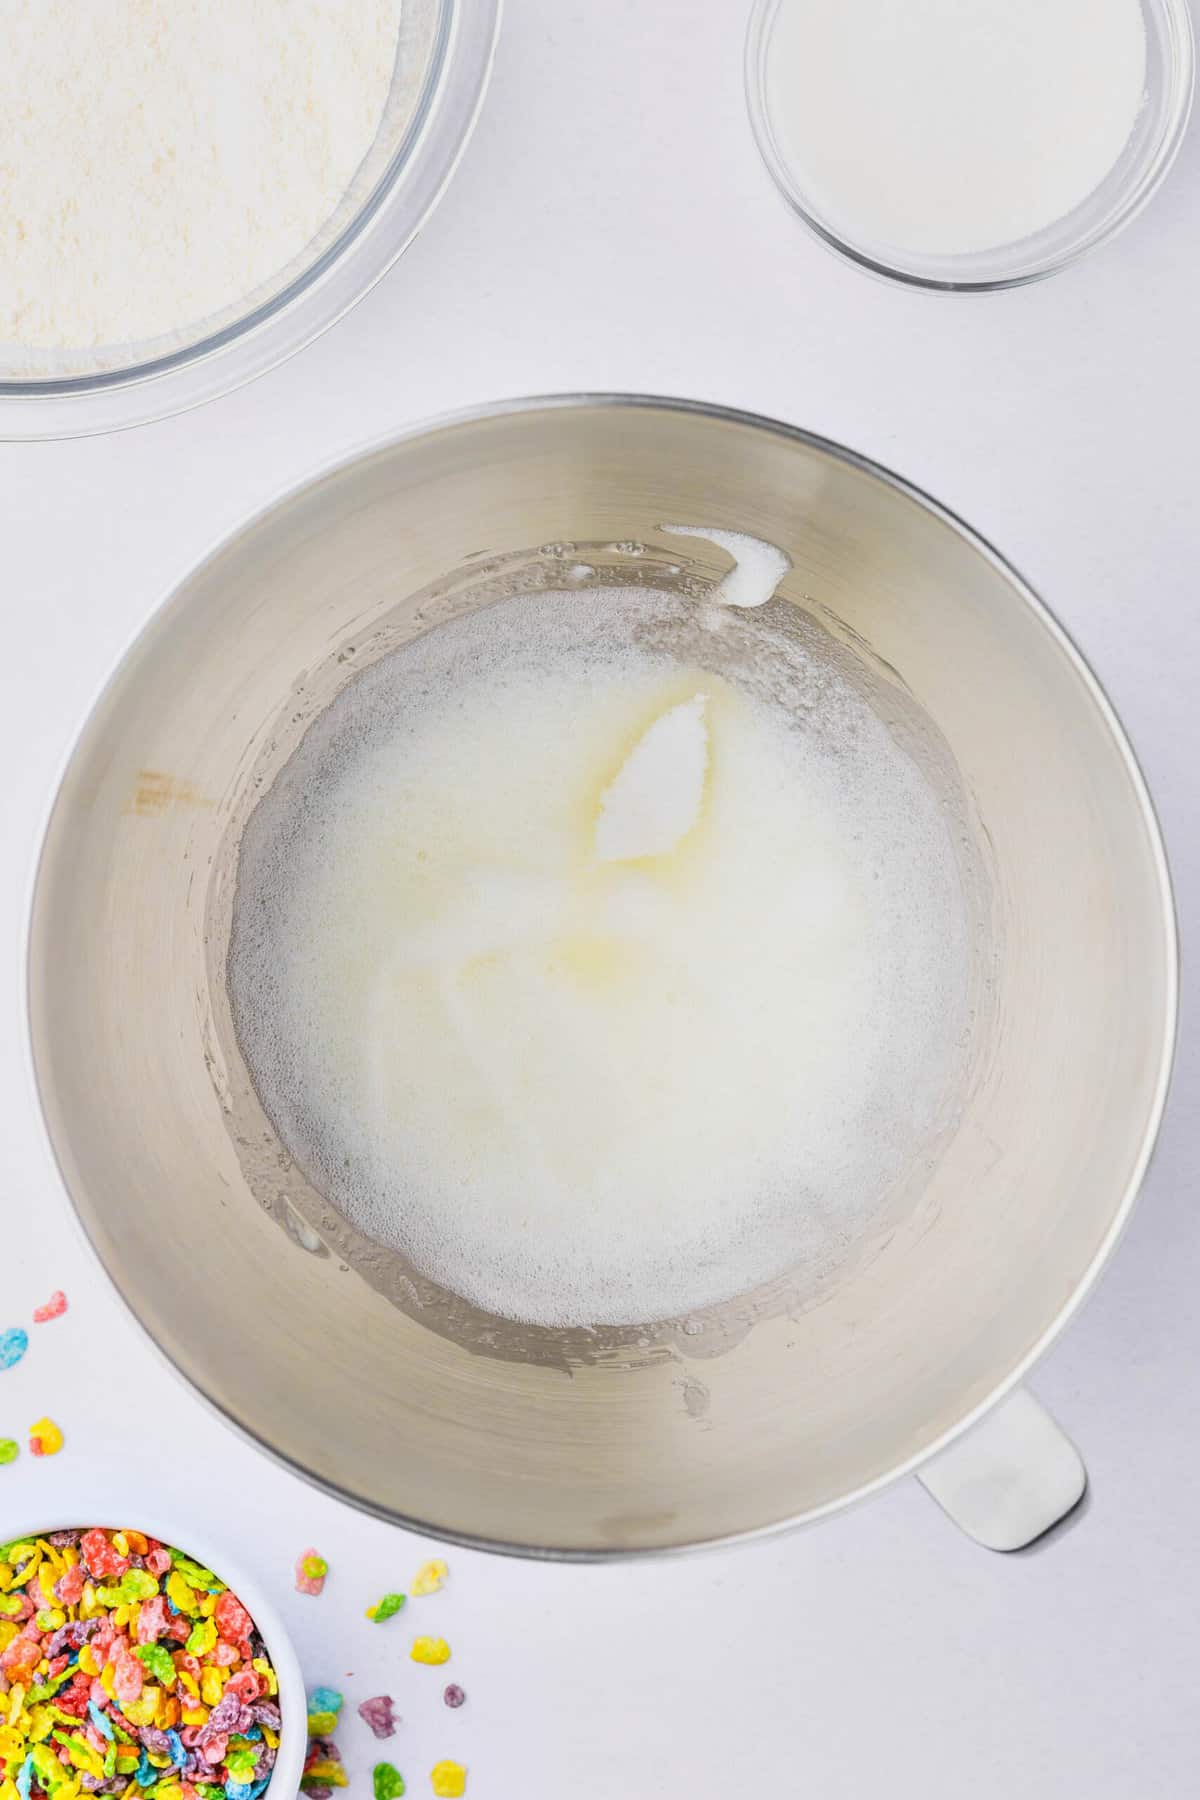 Foamy egg whites in a metal mixing bowl.